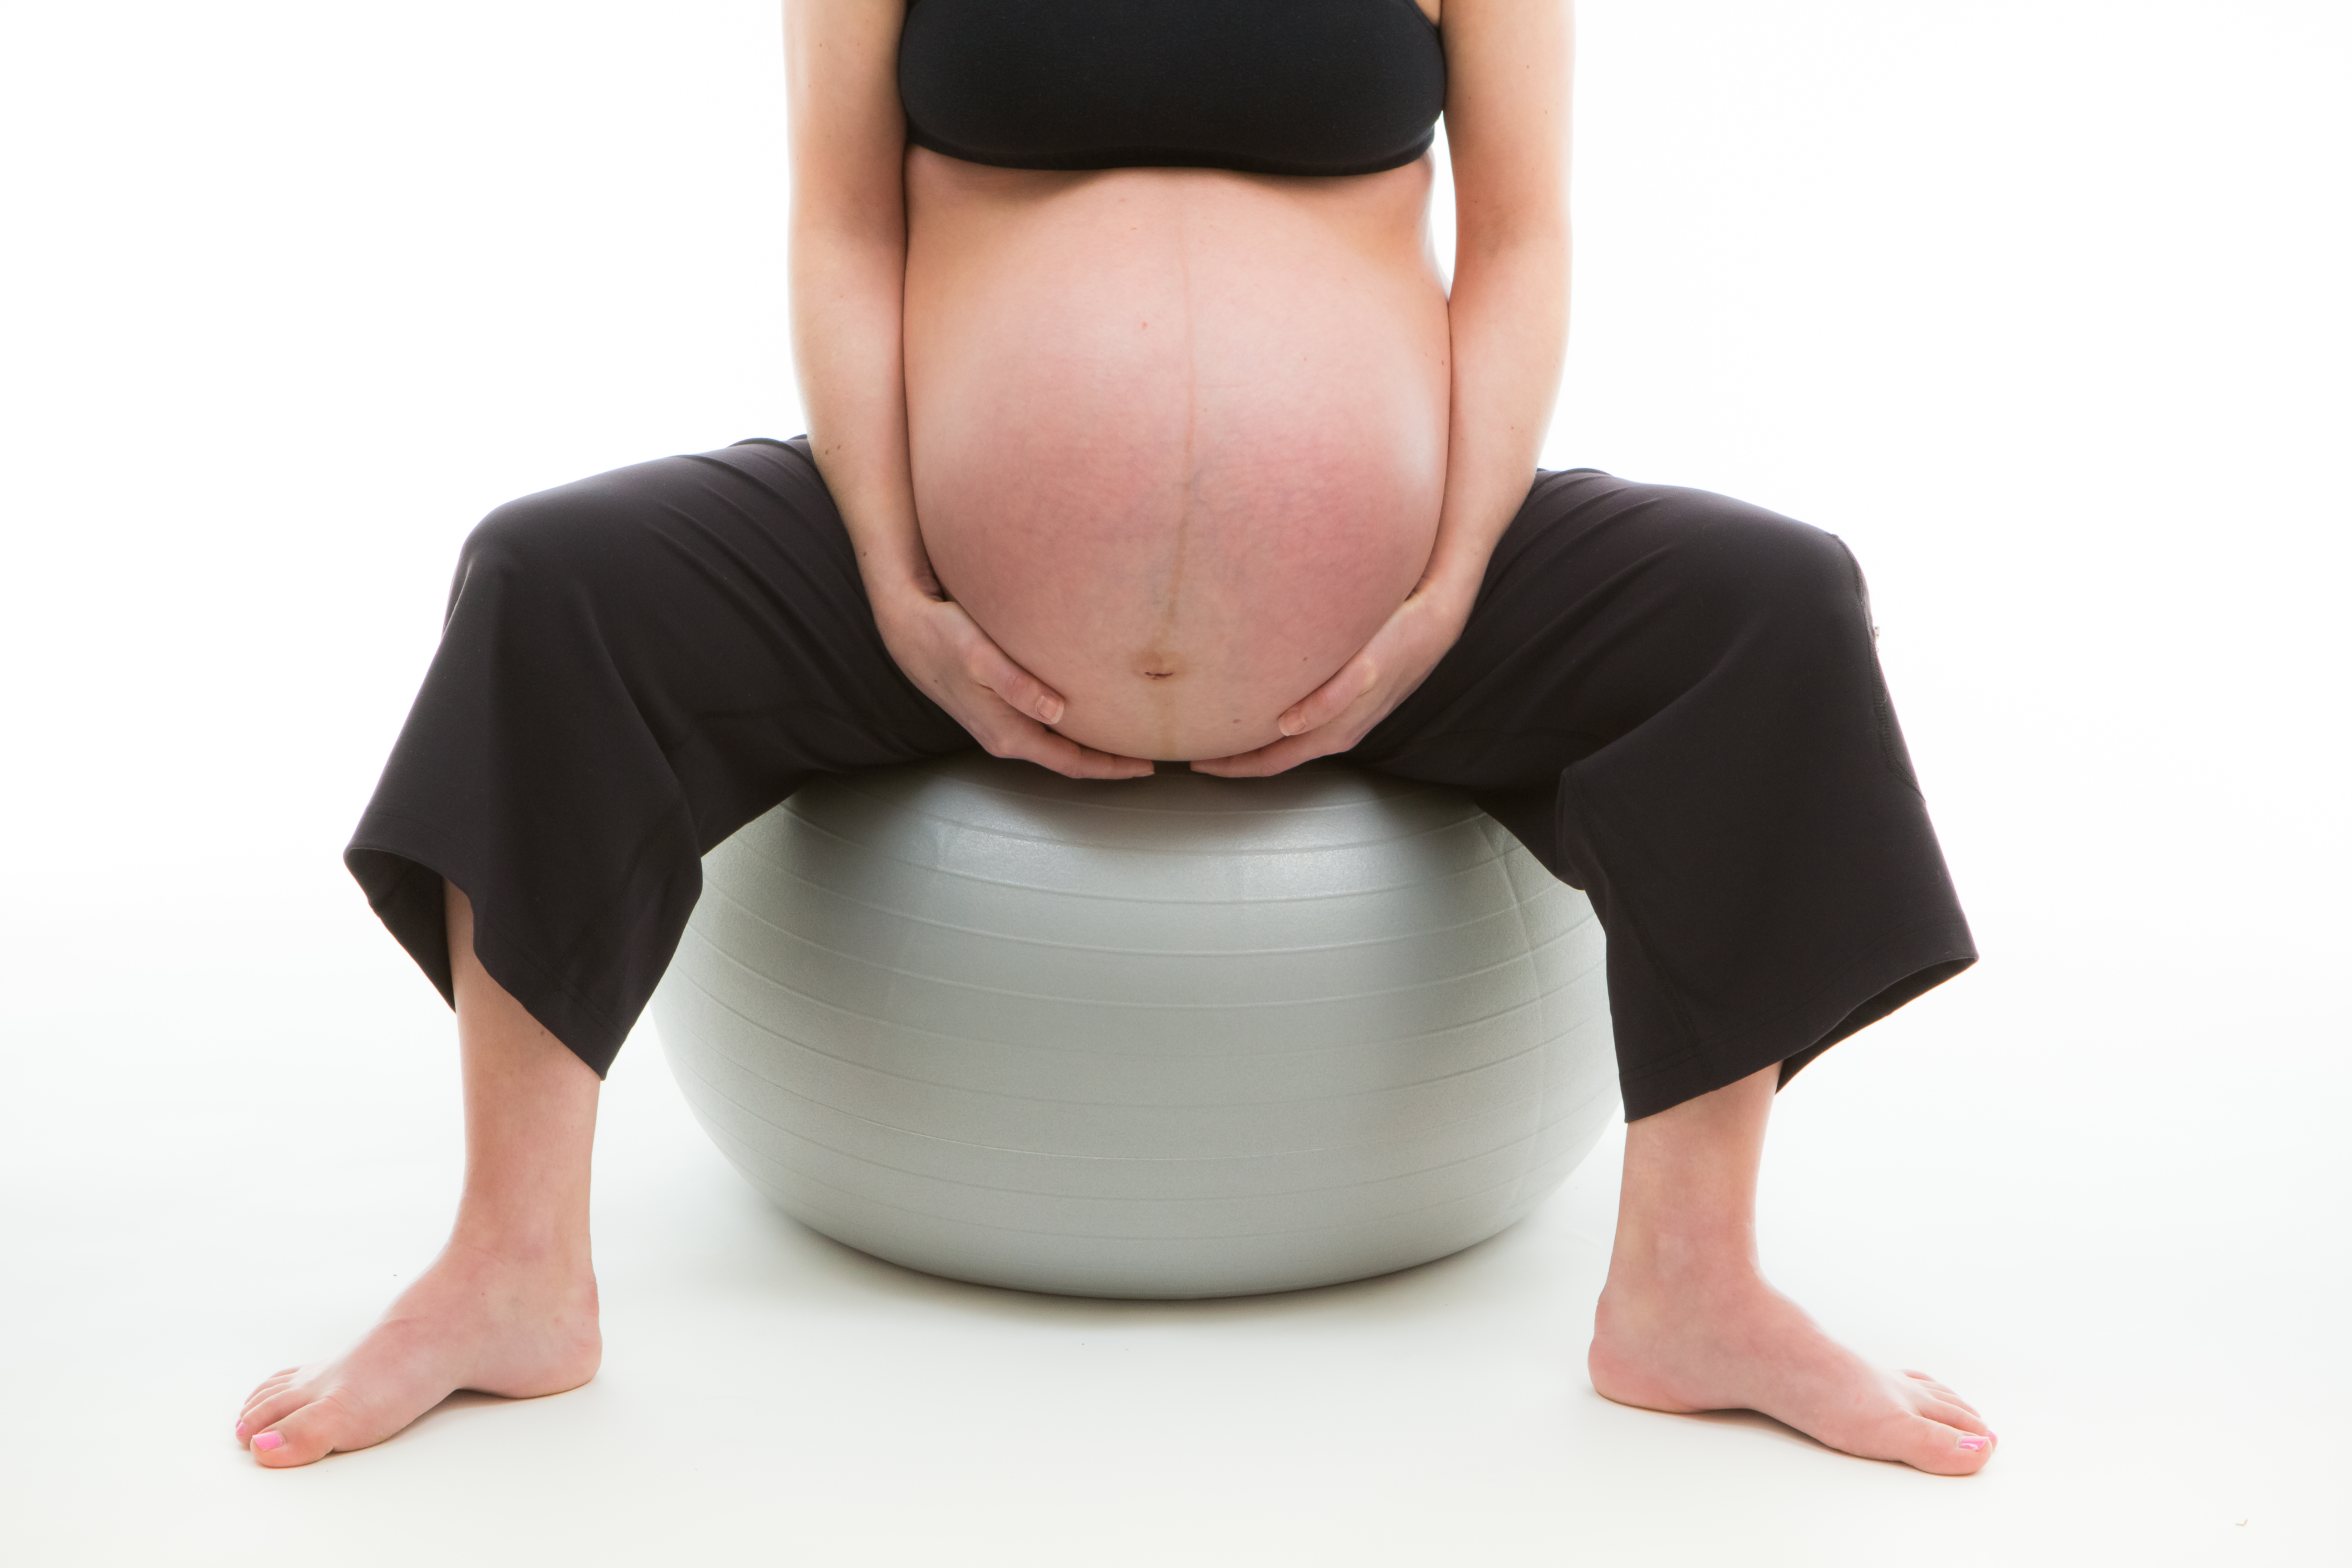 Pregnant woman in black pants and black sports bra on birthing ball on white background.